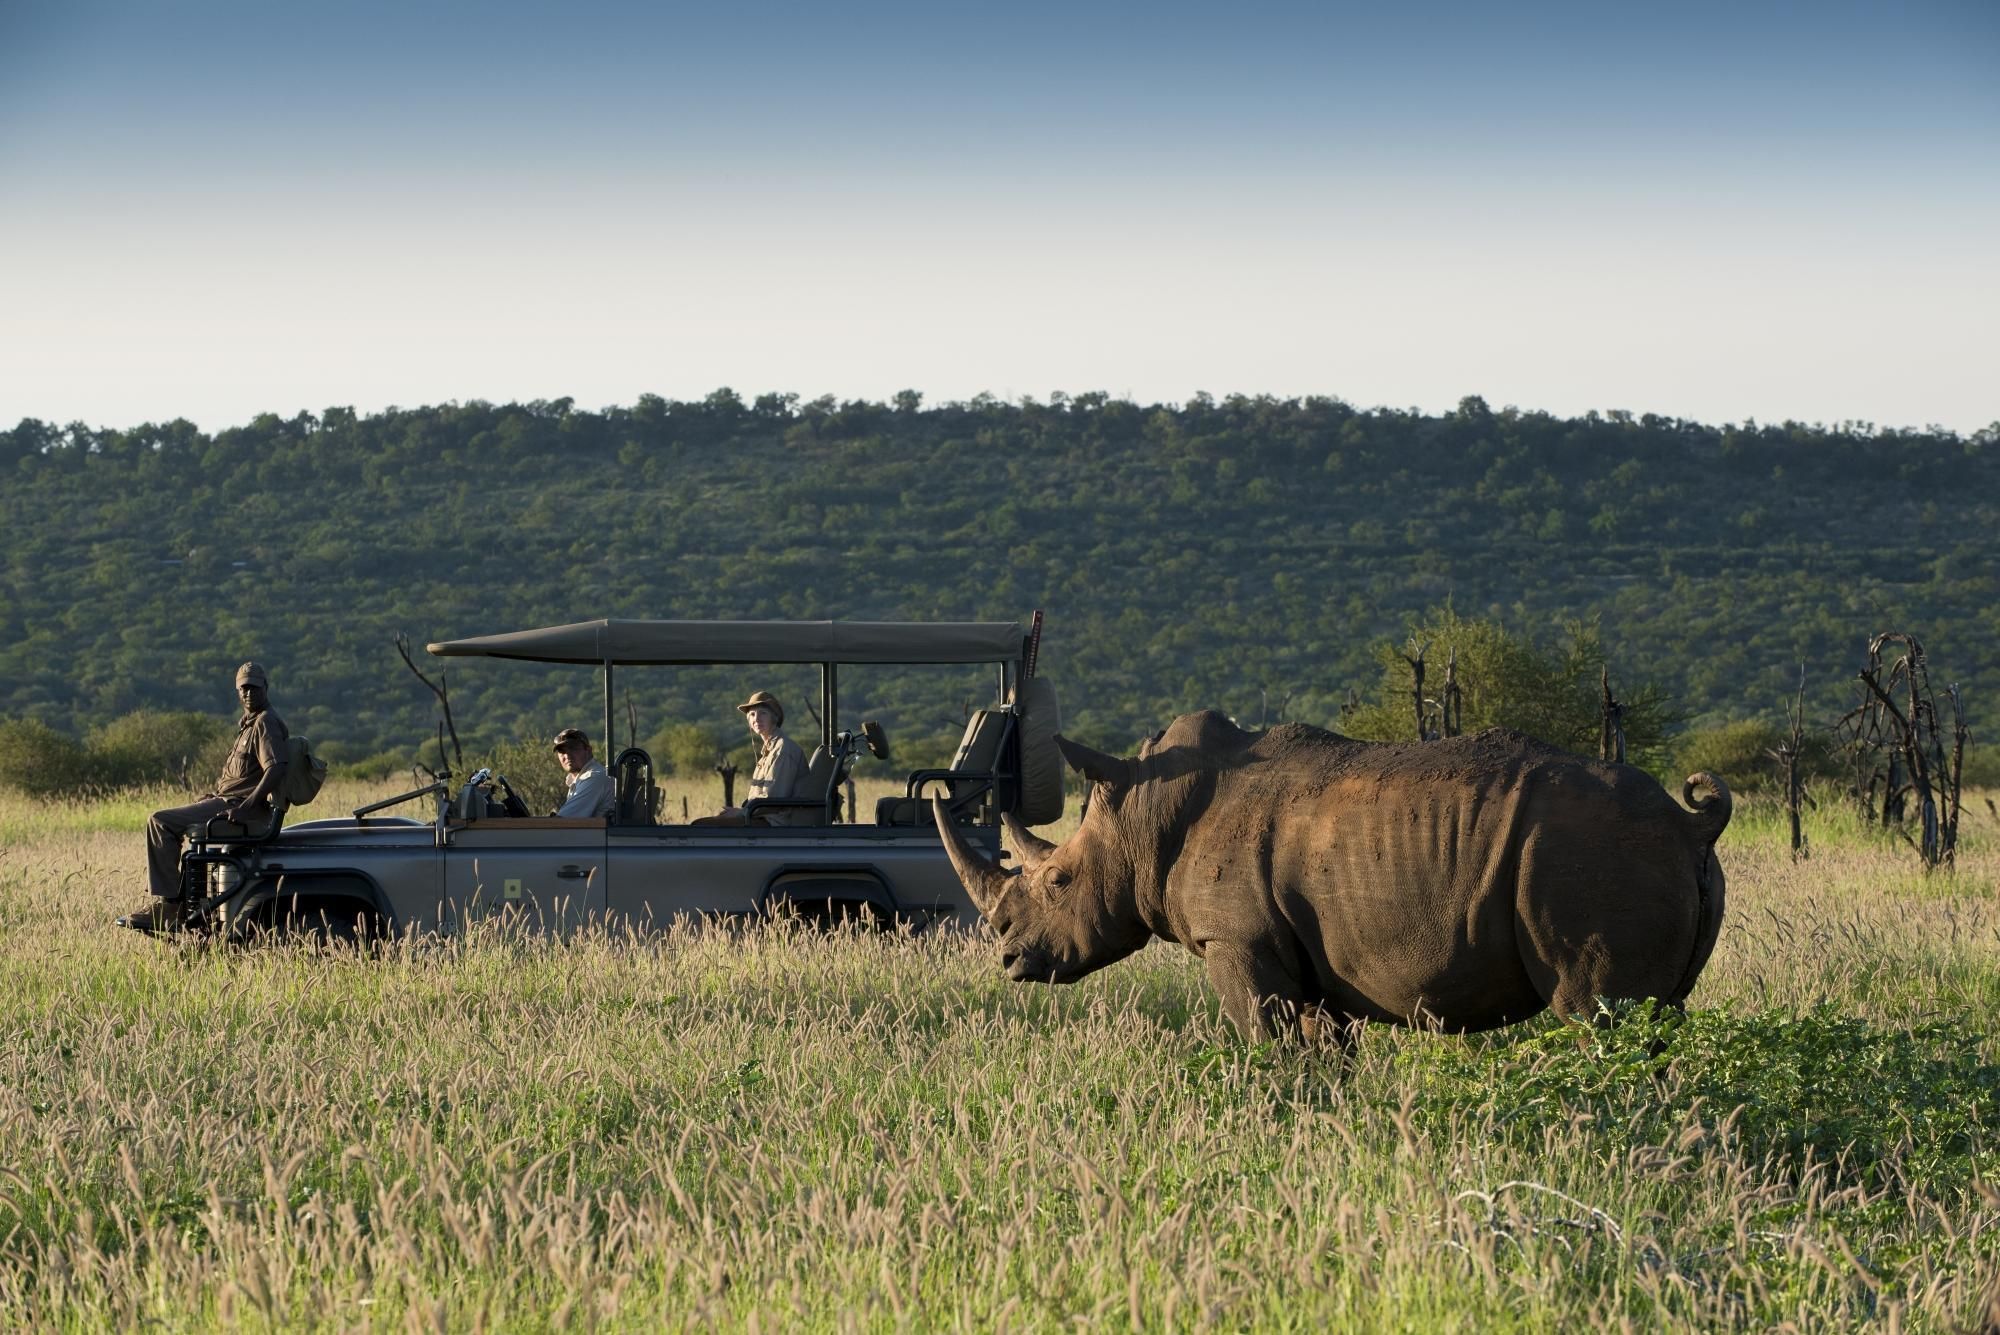 Rhino seen on a game drive, displaying animal conservation in South Africa